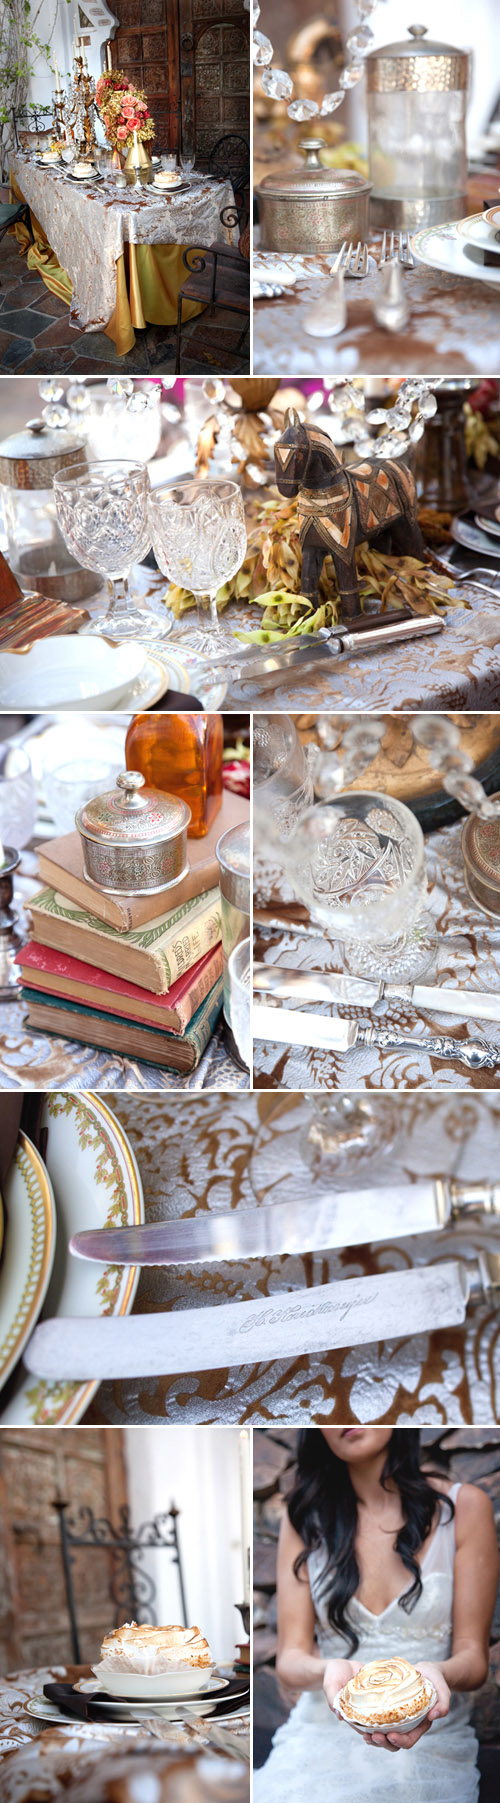 Elegant old-world European inspired wedding decor and tablescape, china and tabletop rentals from Small Masterpiece, images by Isabel Lawrence Photographers